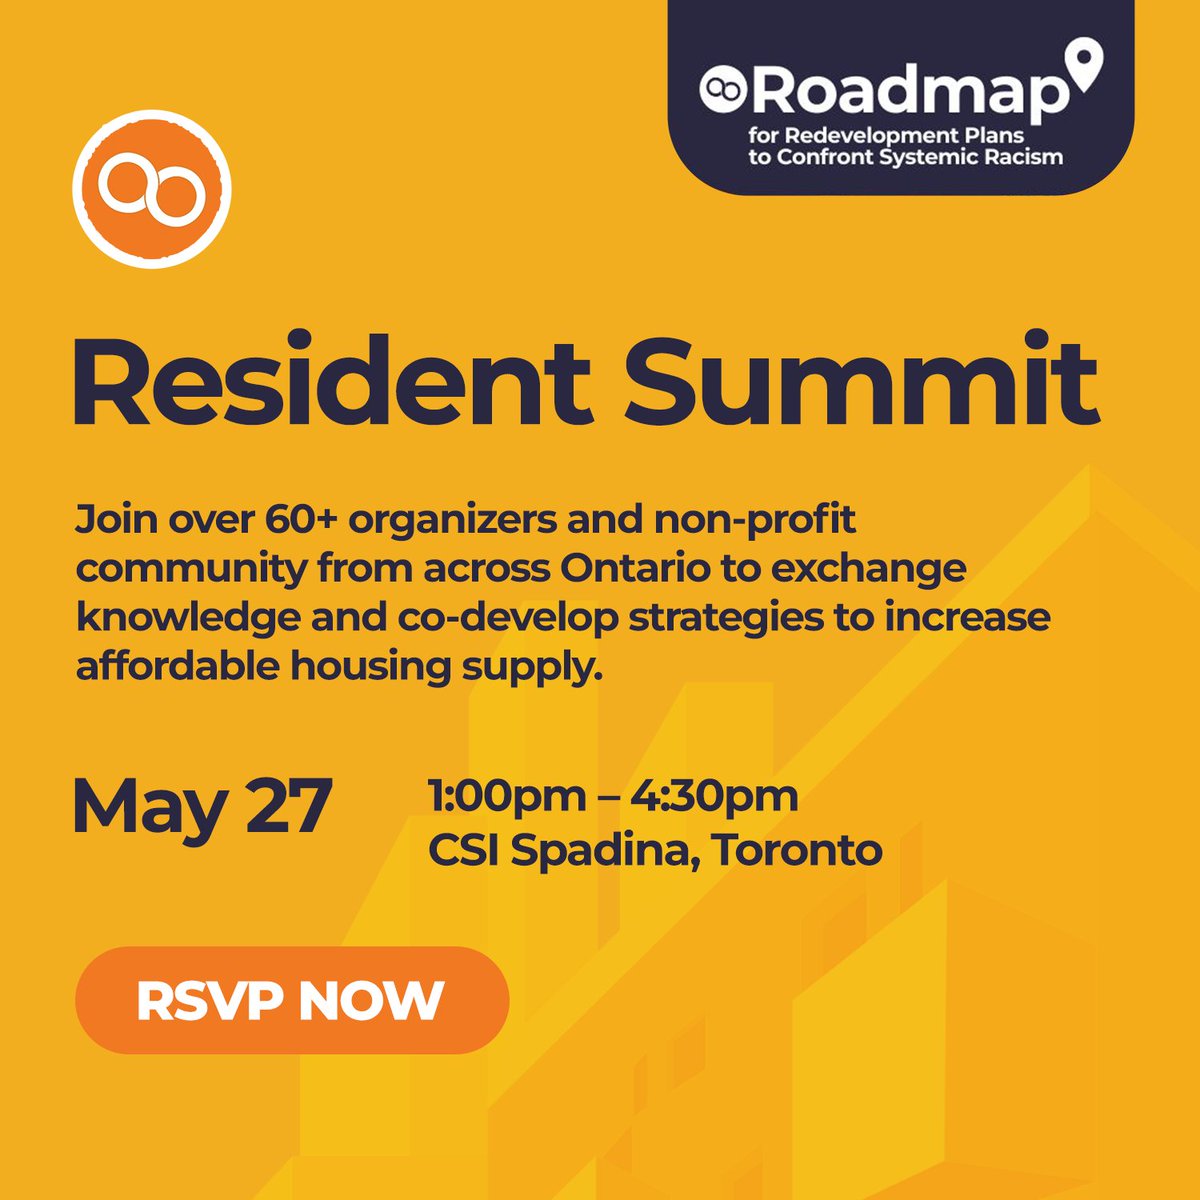 Join @CPPlanning_ for a half-day summit. Participants will learn and share to address systemic inequities and increase the supply of affordable housing

When: May 27, 1 PM - 4:30 PM
Where: 192 Spadina Ave

RSVP: eventbrite.ca/e/roadmap-resi…

#communitybenefits #affordablehousing